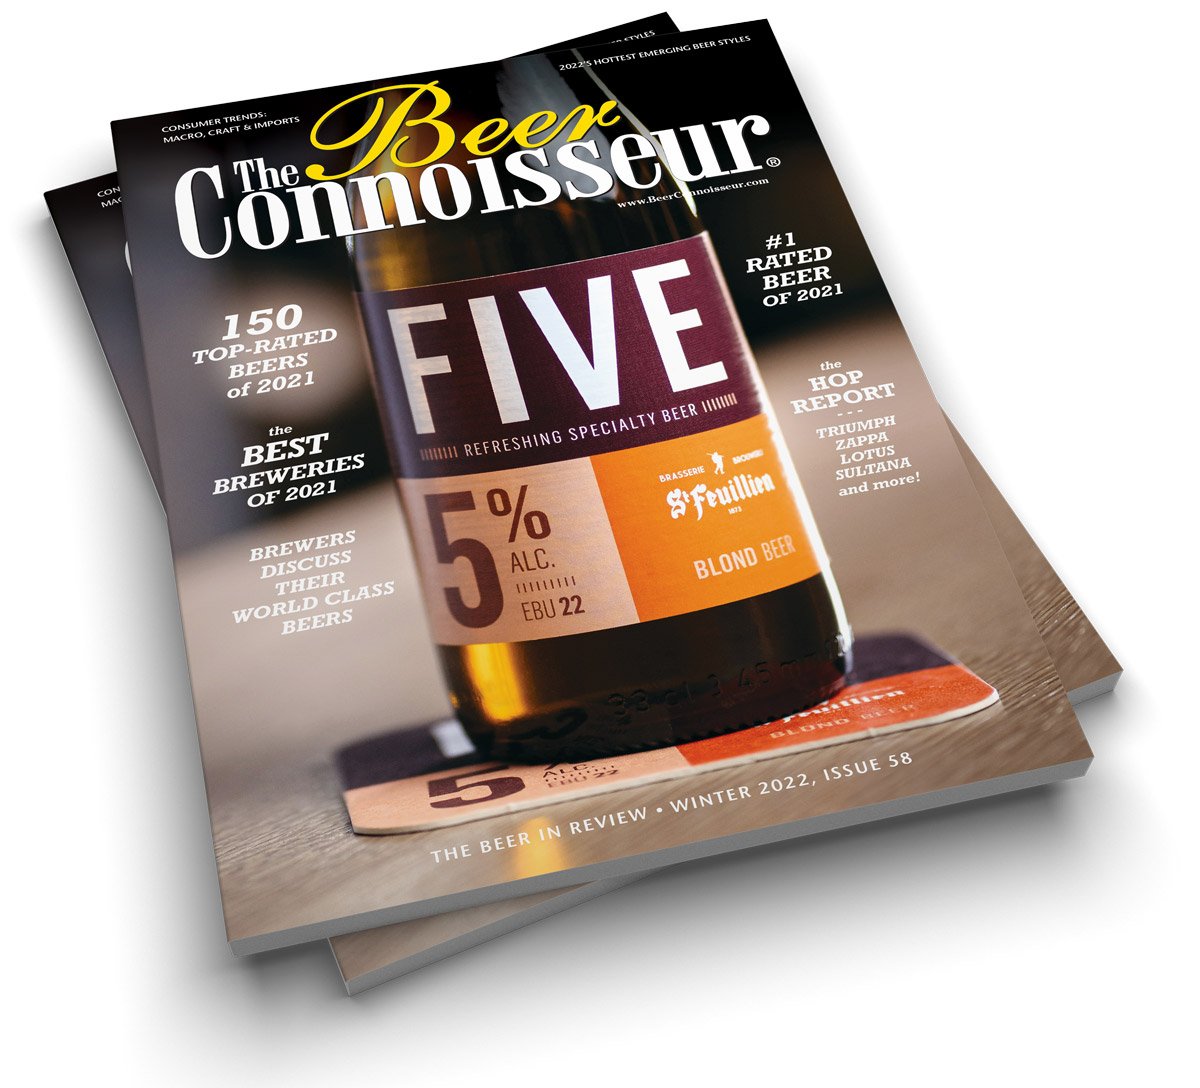 The Beer Connoisseur - Winter 2022, Issue 58